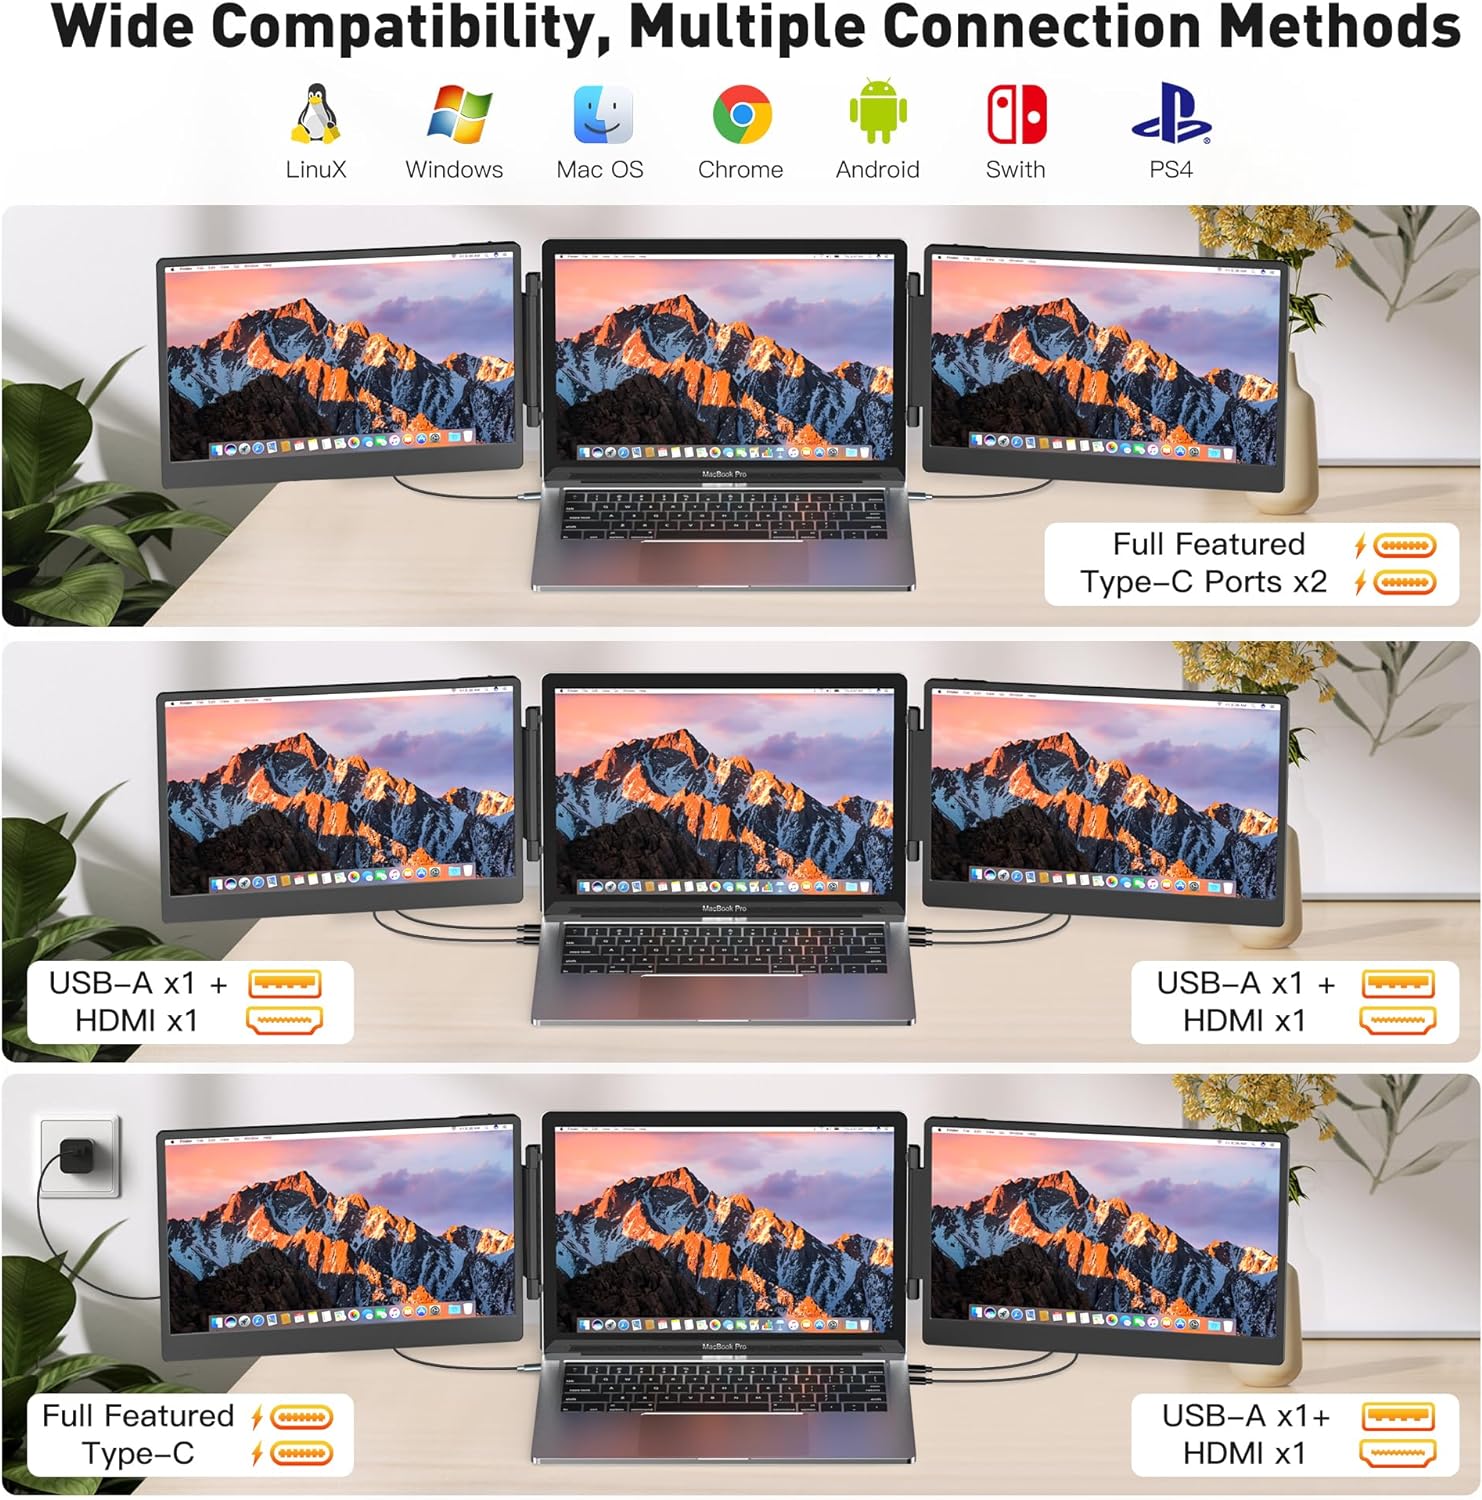 Kwumsy S3 Triple Monitor Extender Laptop